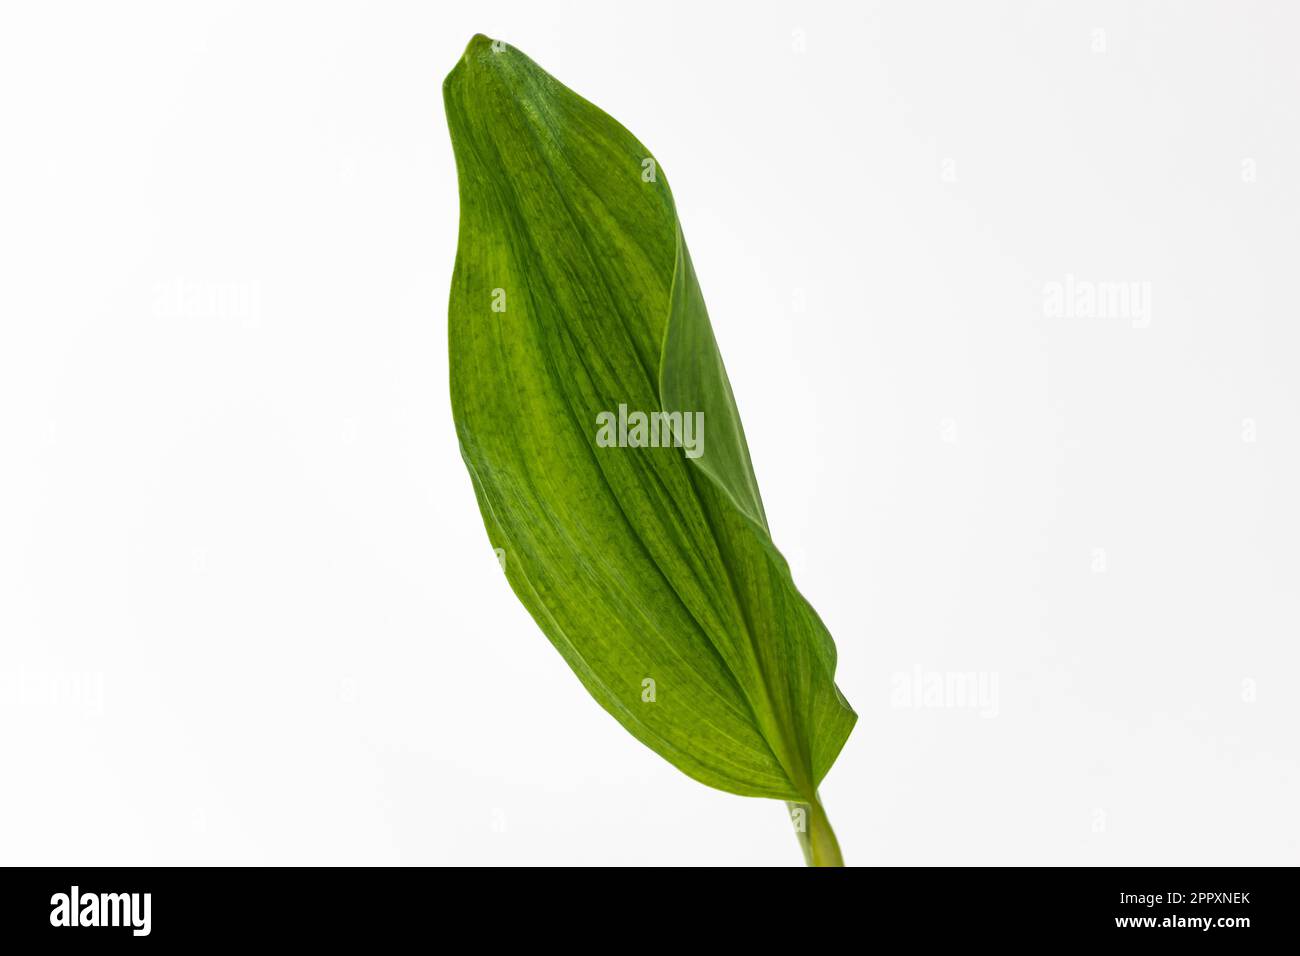 East Asian food culture. Thin, elongated, edible leaves. Edible plants with good chewing texture Stock Photo